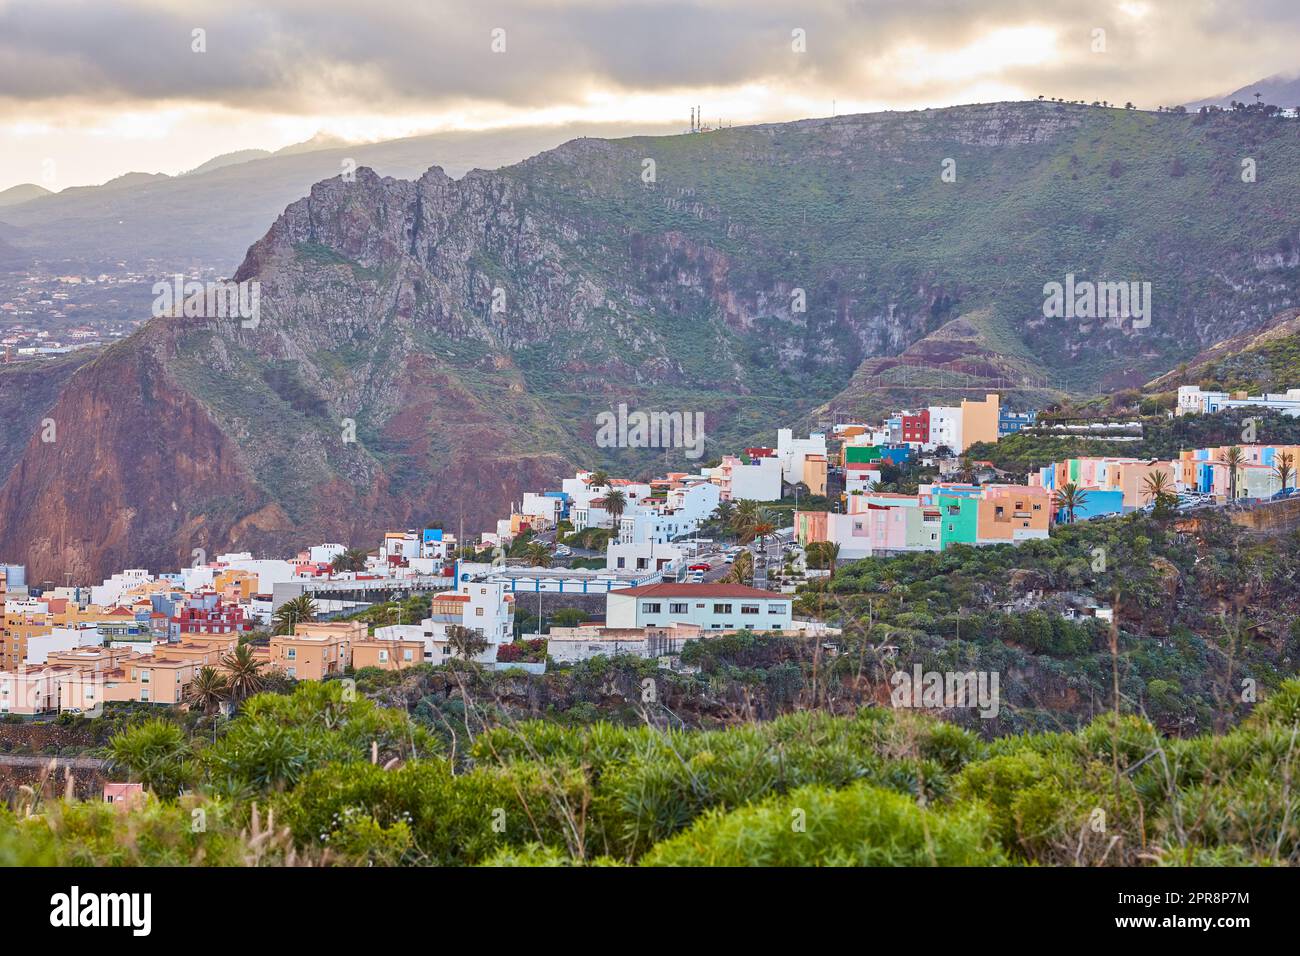 Historical spanish or colonial architecture in tropical village in tourism destination. City and mountain view of residential houses or buildings in serene hill valley in Santa Cruz, La Palma, Spain. Stock Photo